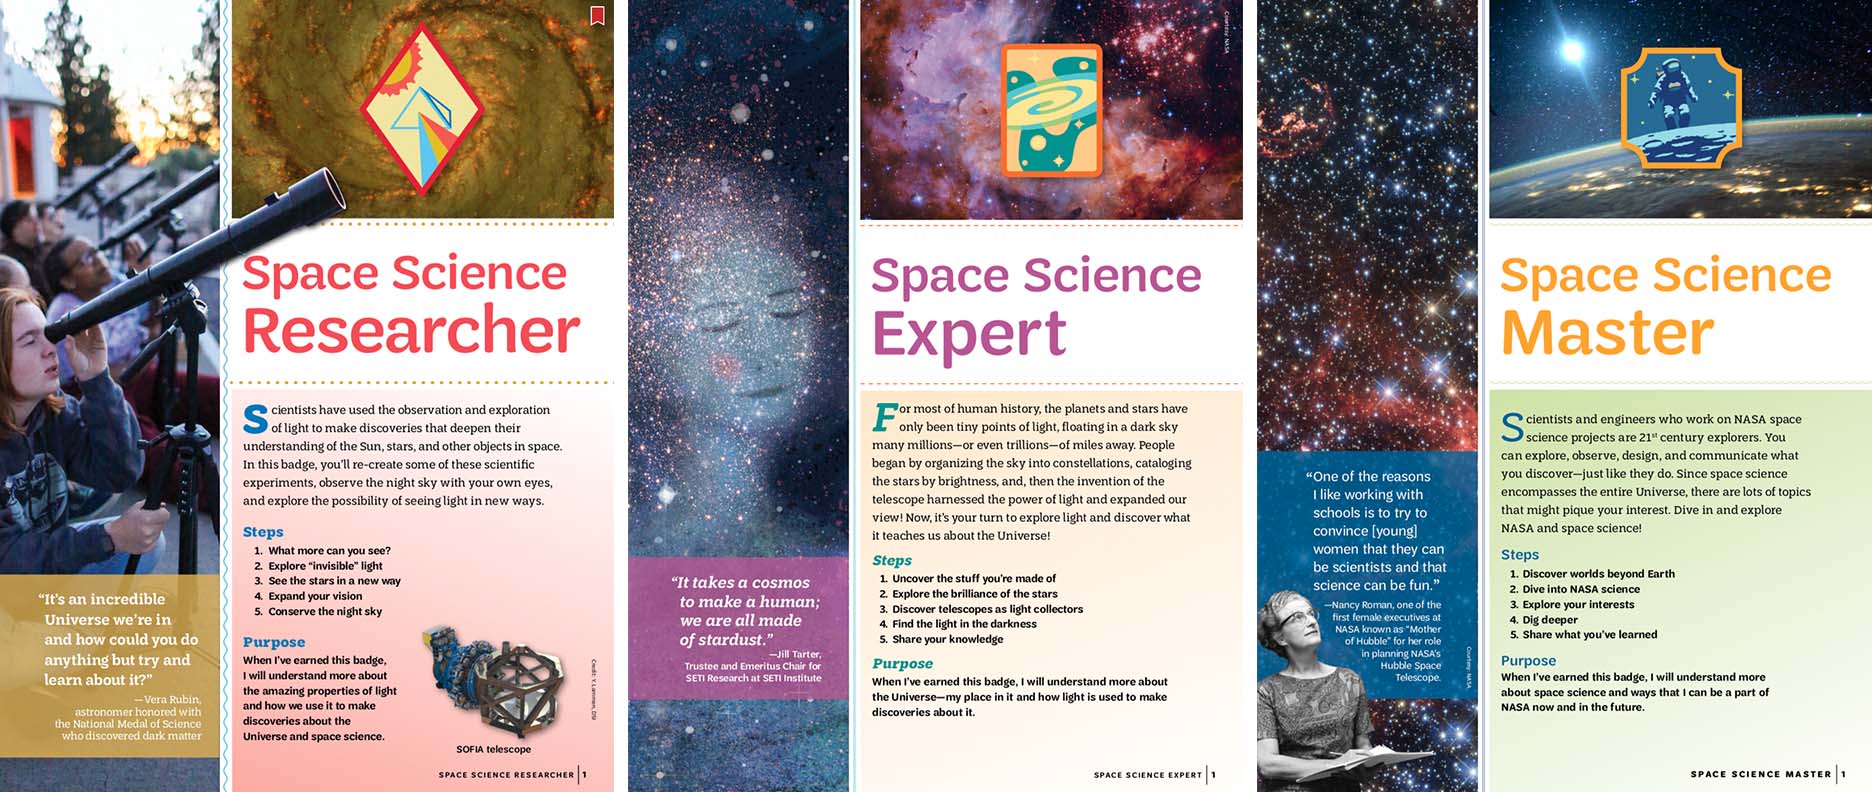 Image displaying all covers for the Space Science badges.